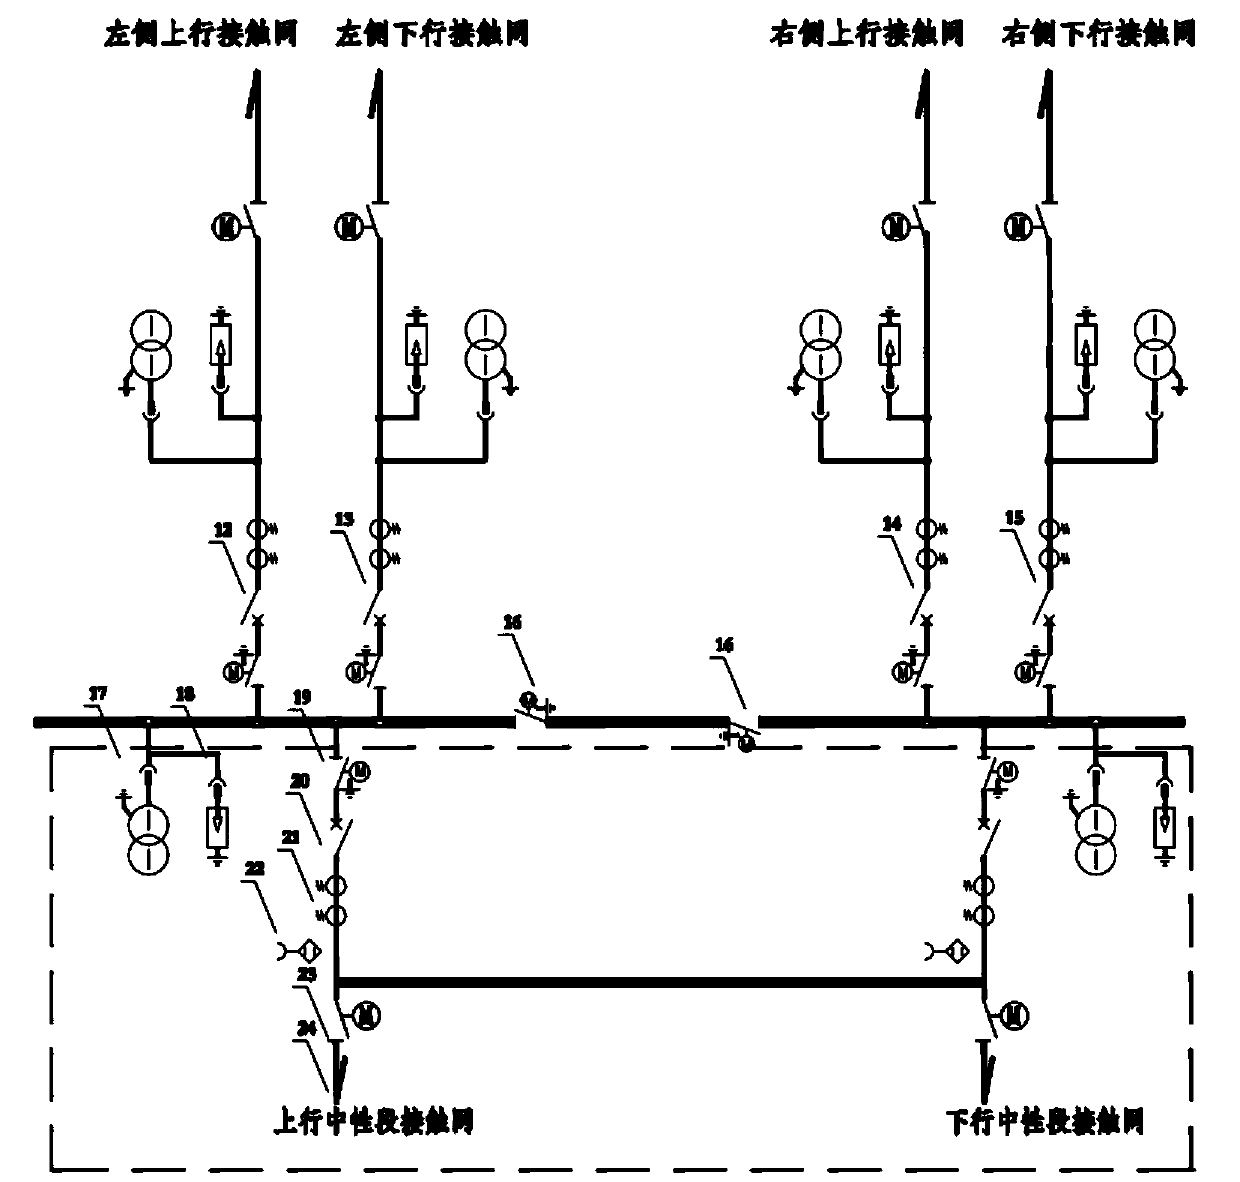 Section post structure applied to alternating-current double-tracked electrified railway bilateral power supply mode